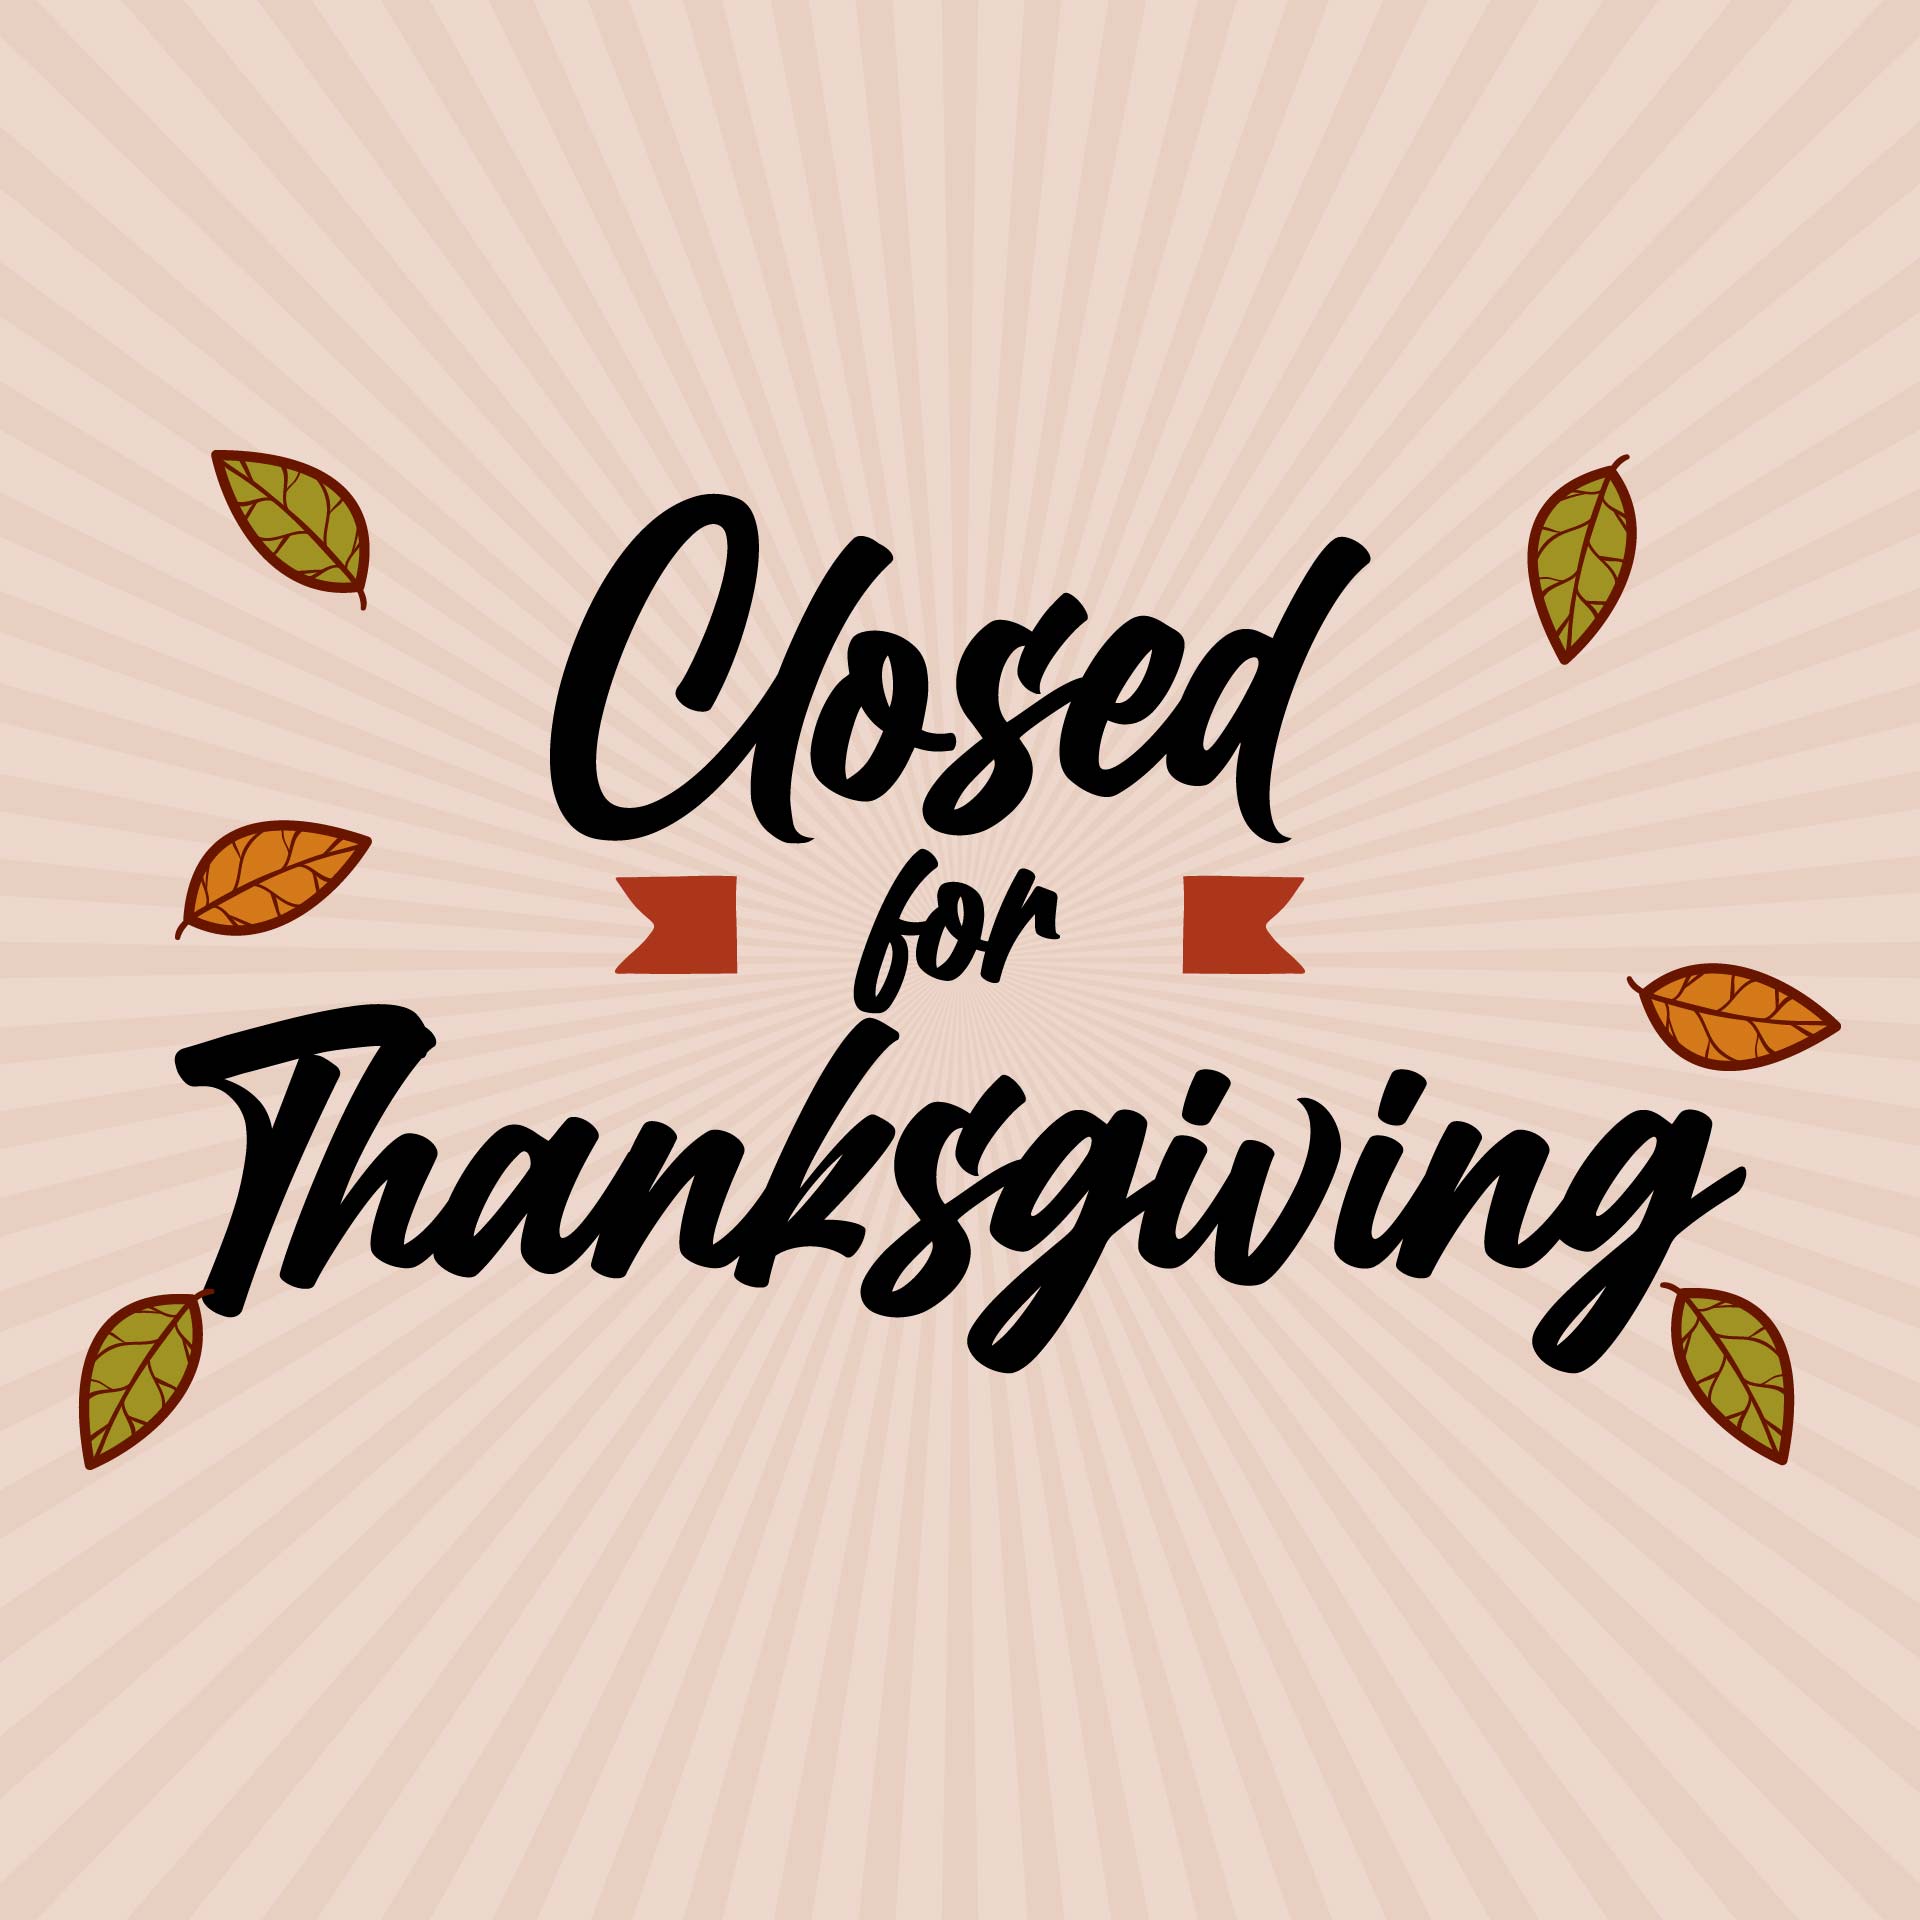 printable-thanksgiving-closed-sign-just-add-your-flair-to-make-it-unique